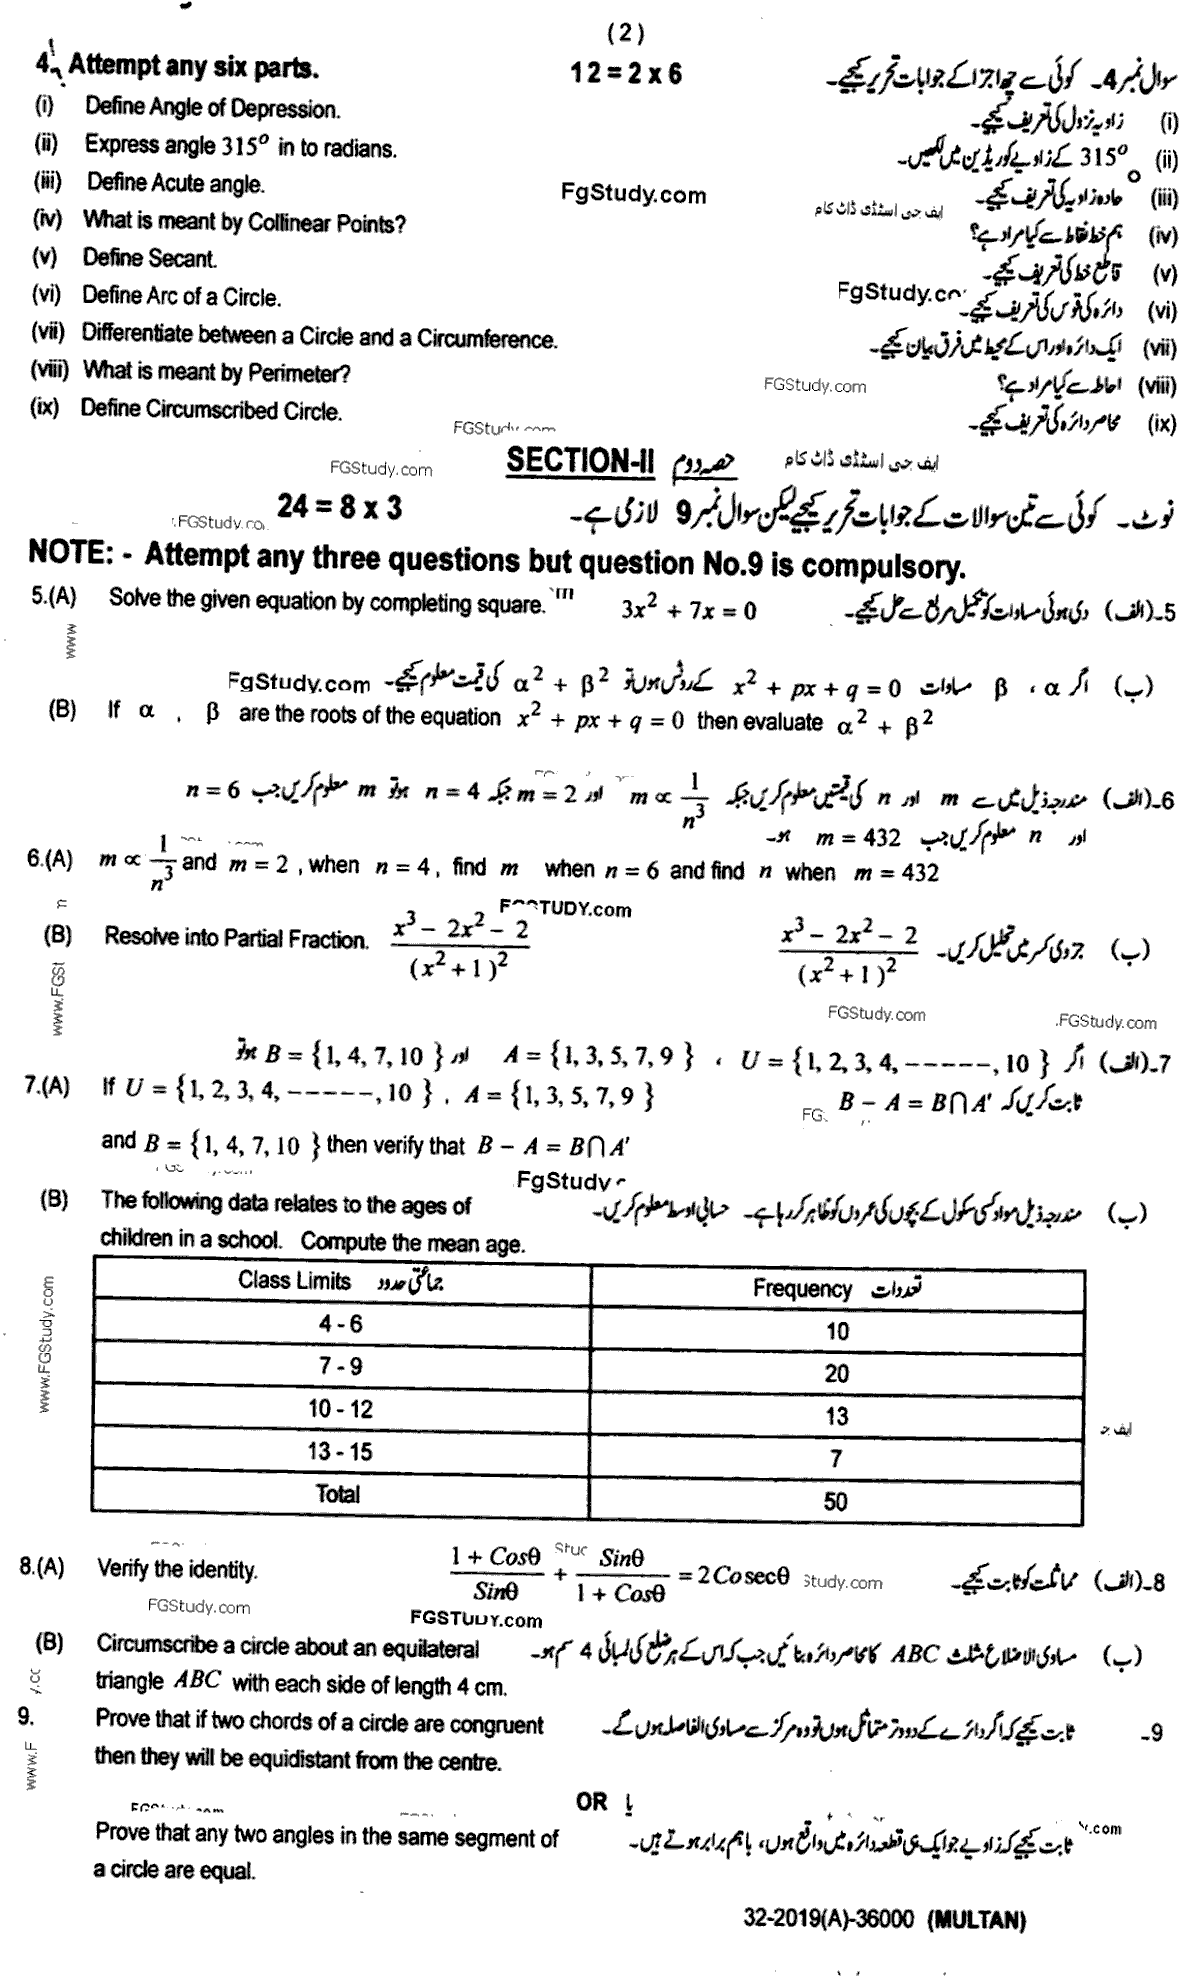 Math Group 2 Subjective 10th Class Past Papers 2019